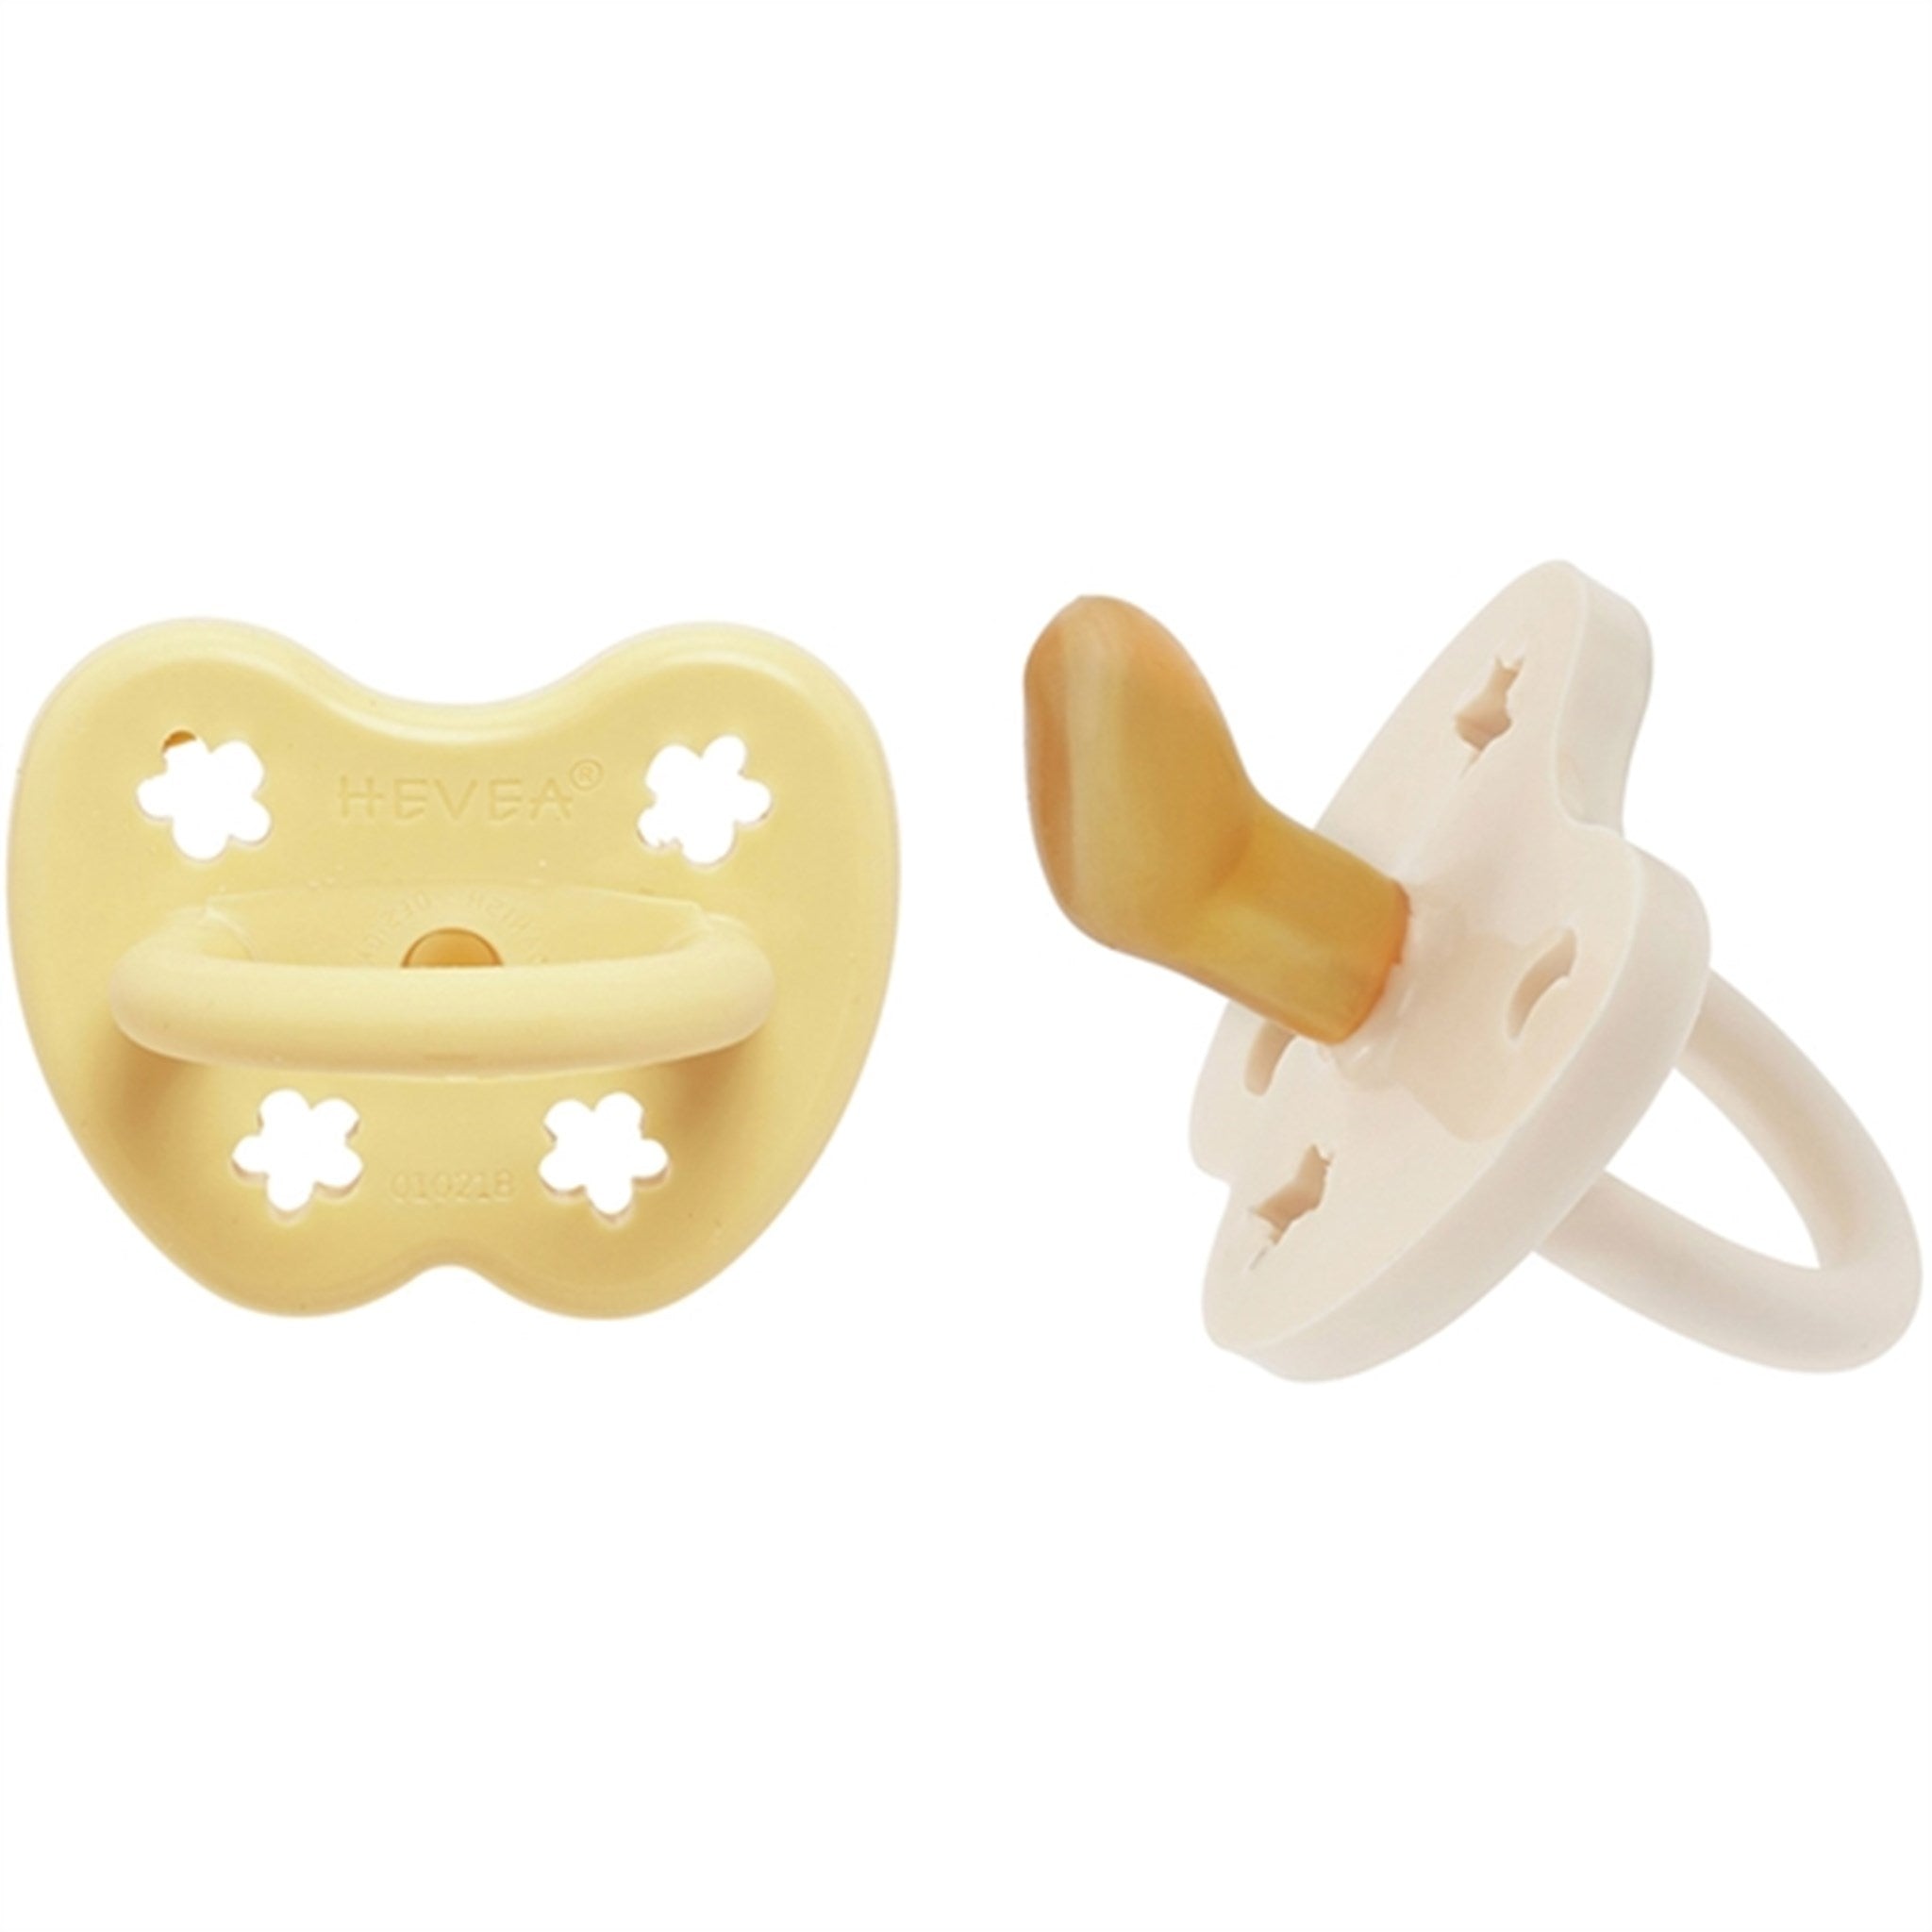 Hevea Pacifier Anatomisk 2-pack Pale Butter & Milky White